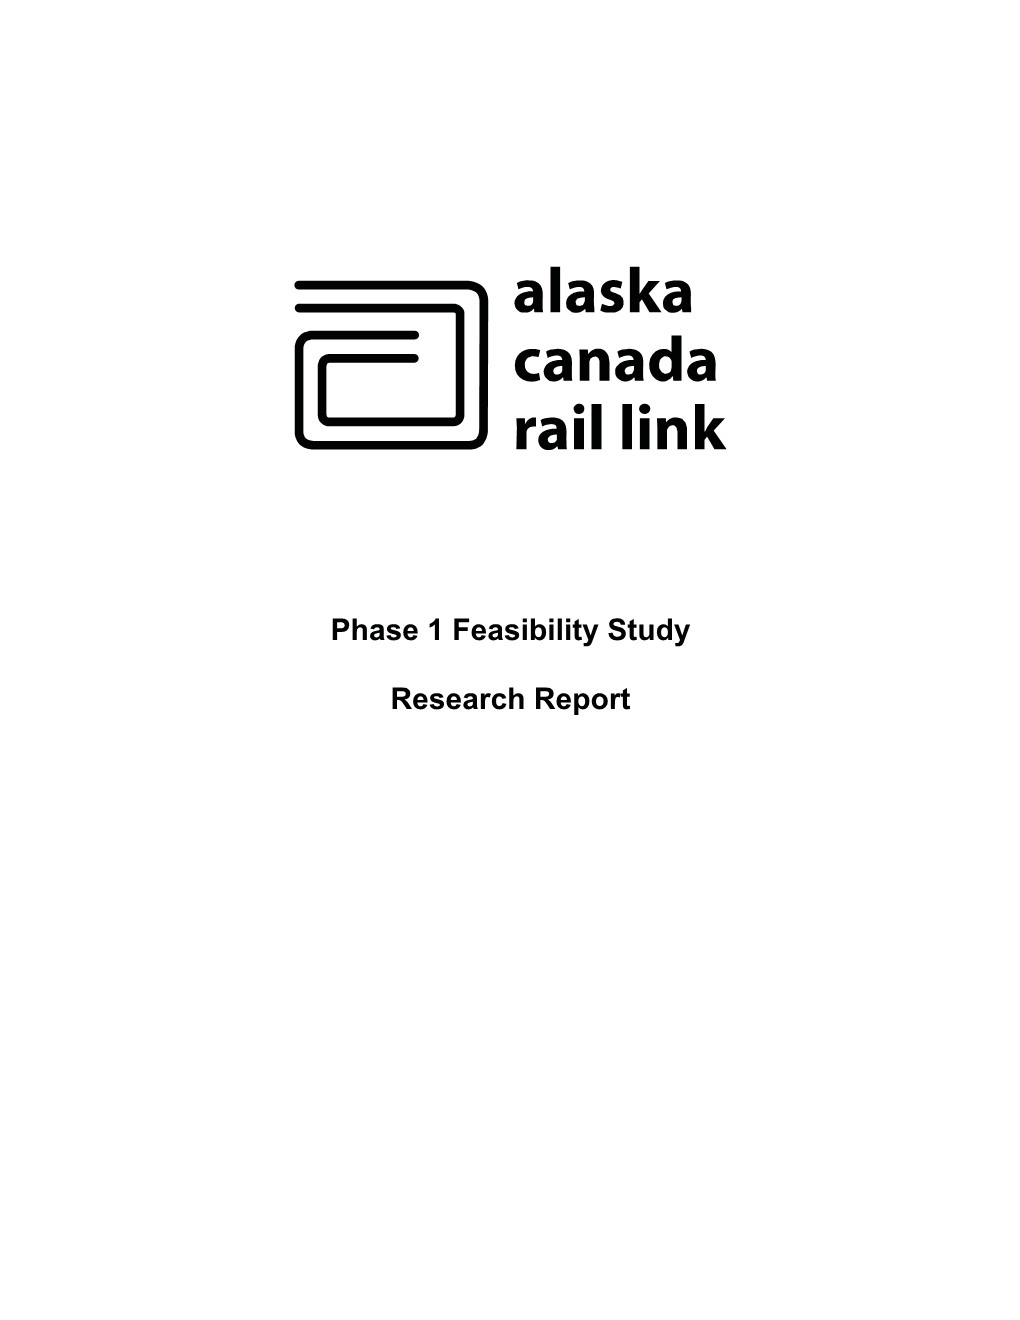 Phase 1 Feasibility Study Research Report